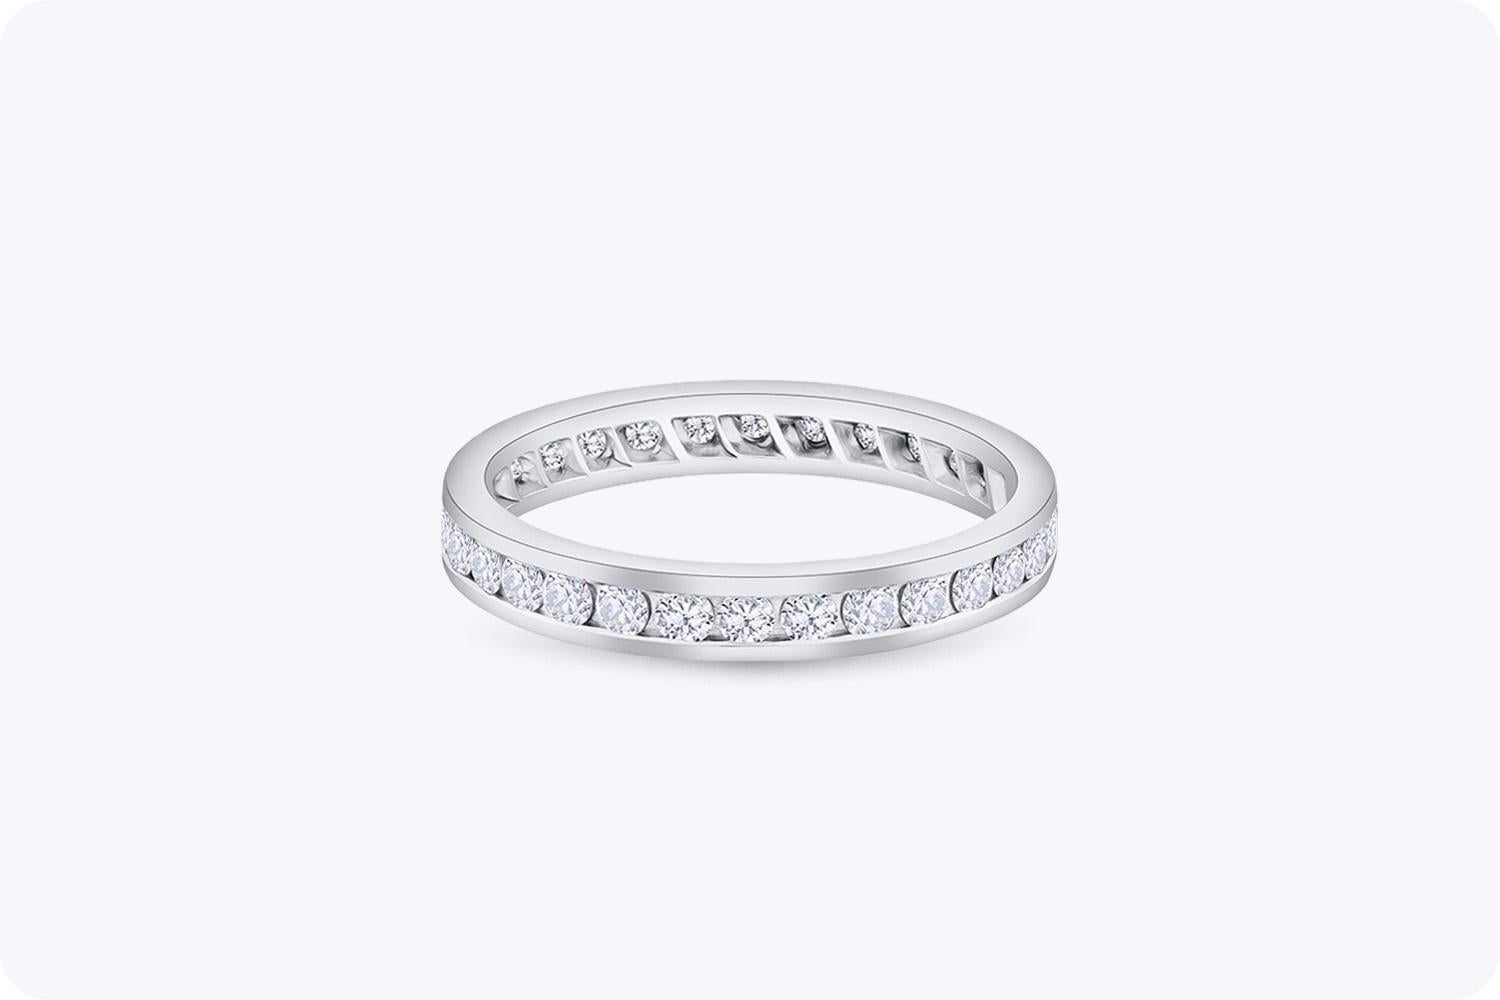 A classic and chic wedding band, showcasing 30 sparkling round diamonds weighing 0.98 carat total. The diamonds are channel set in 18k white gold, which makes it a perfect complement for a gorgeous engagement ring. Size 7.5 US.

Roman Malakov is a